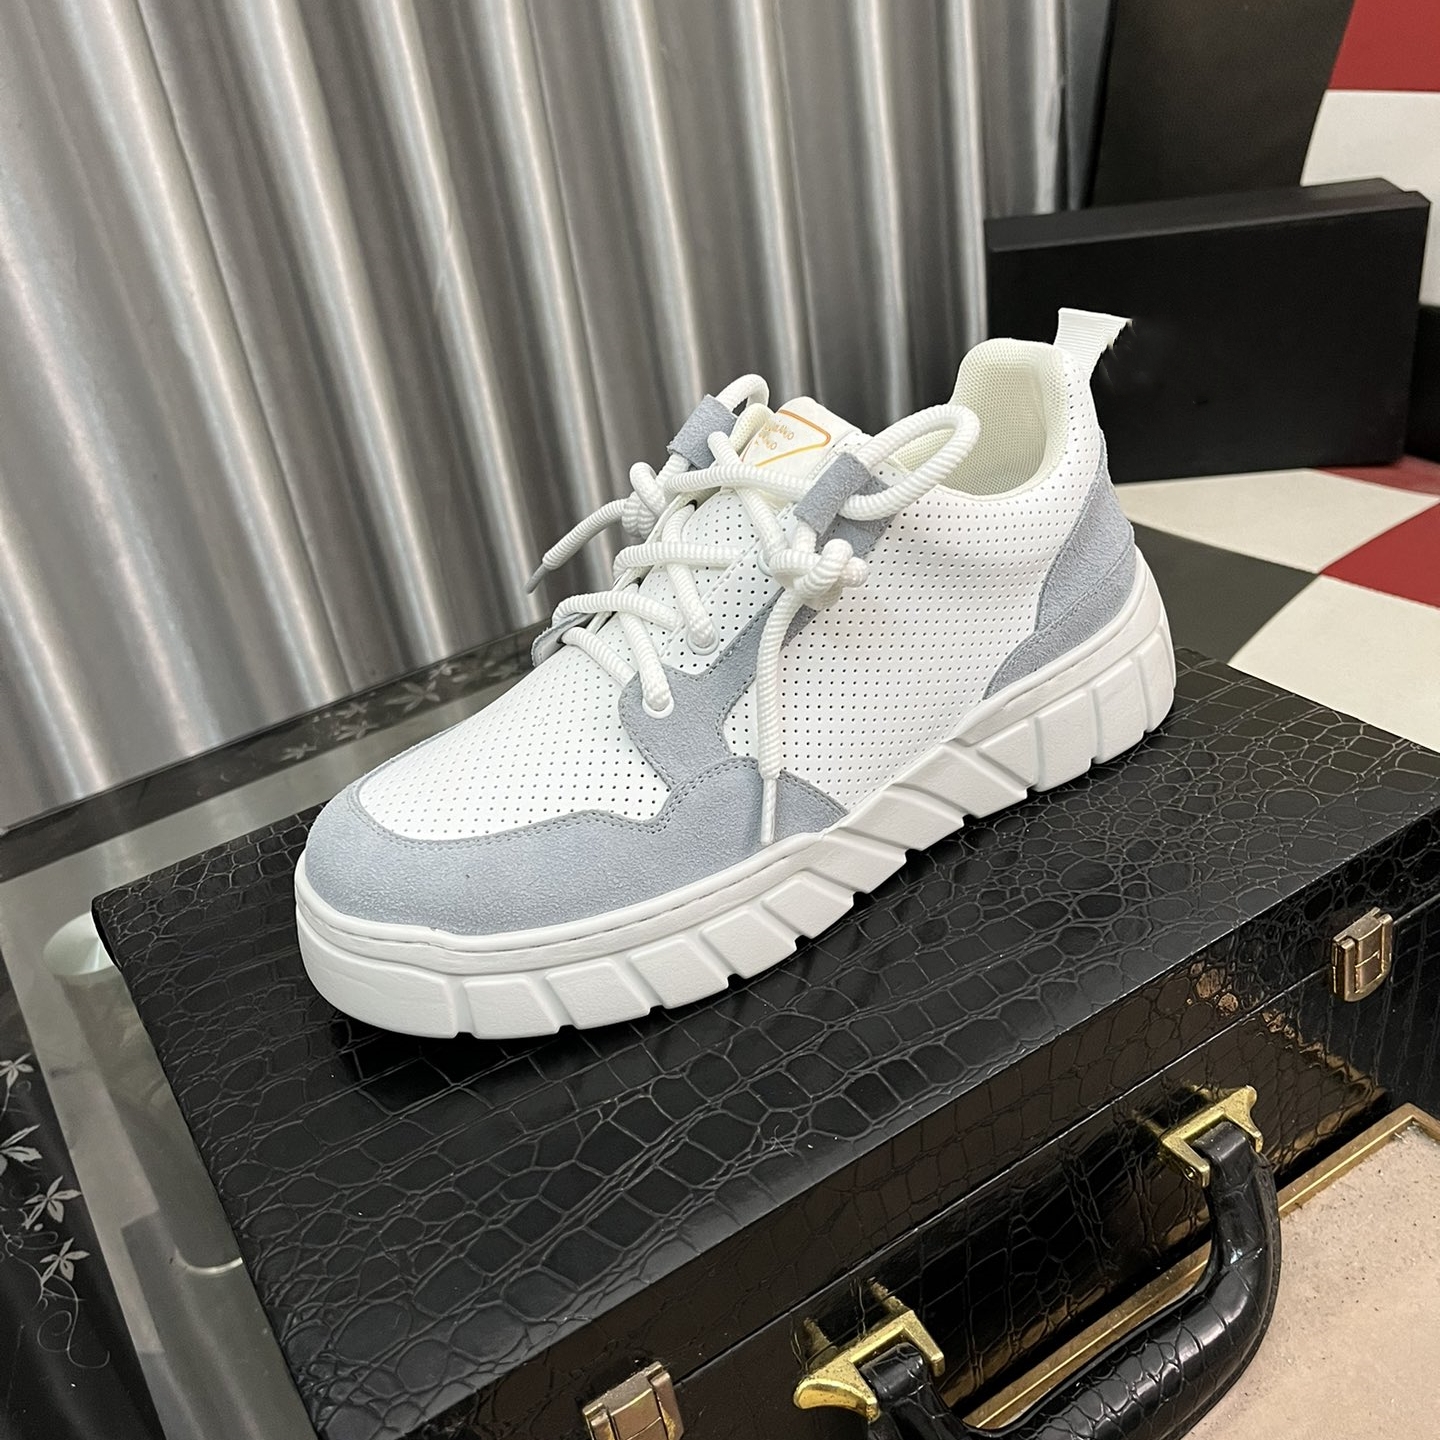 2024 Fashion shoes Men's casual shoes Running shoes Quality workmanship, fashion, high-quality leather lining, soft rubber wear-resistant outsole, size: 38-44